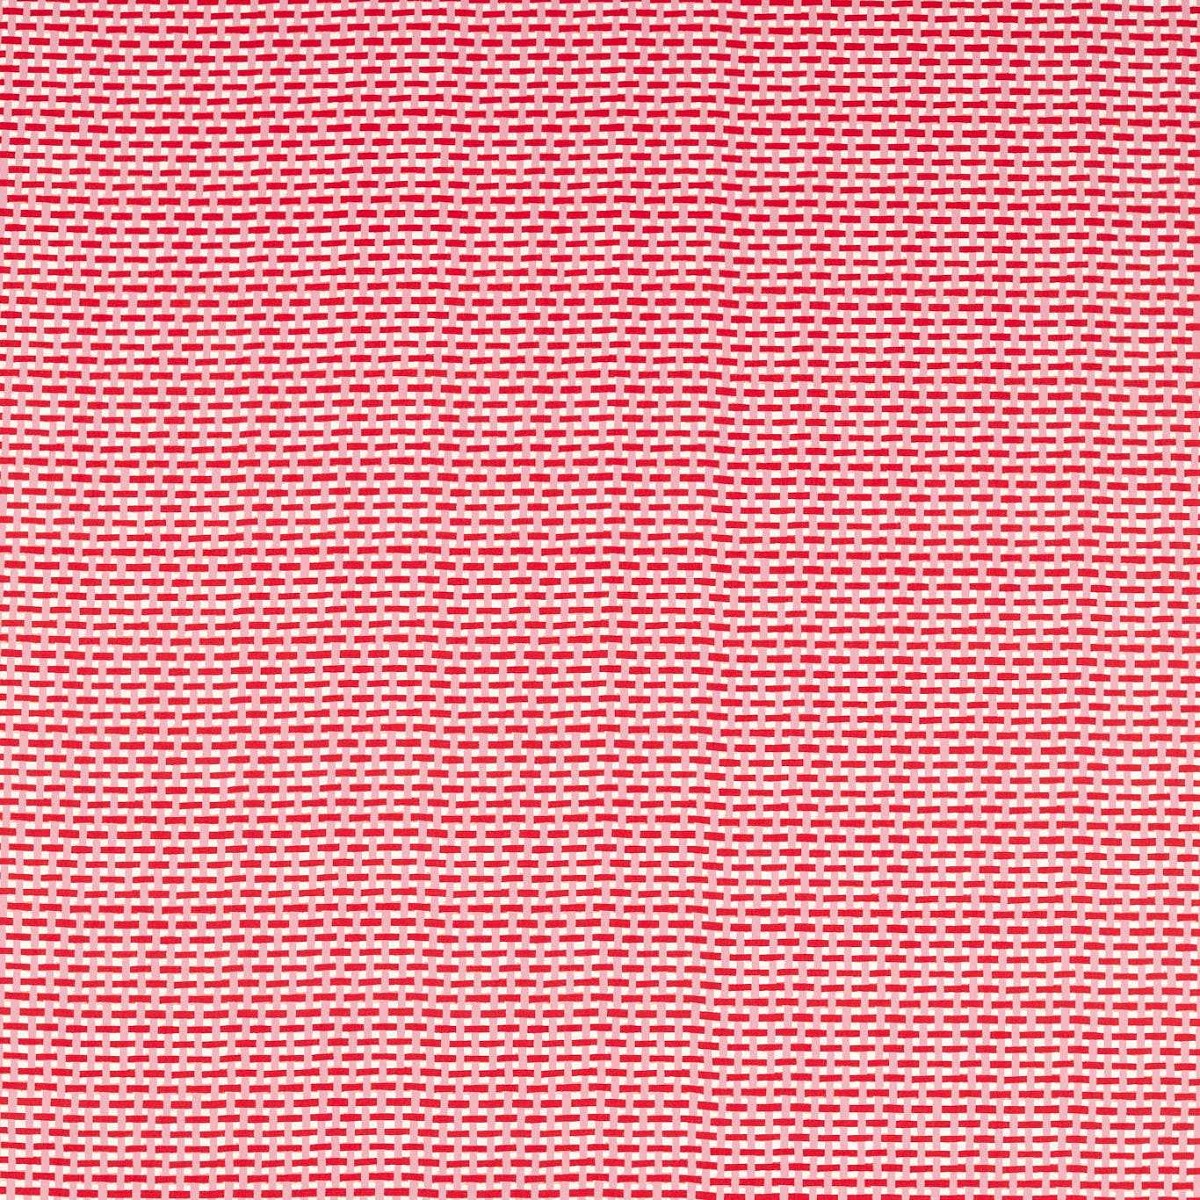 Basket Weave Coral/Rose Fabric by Harlequin